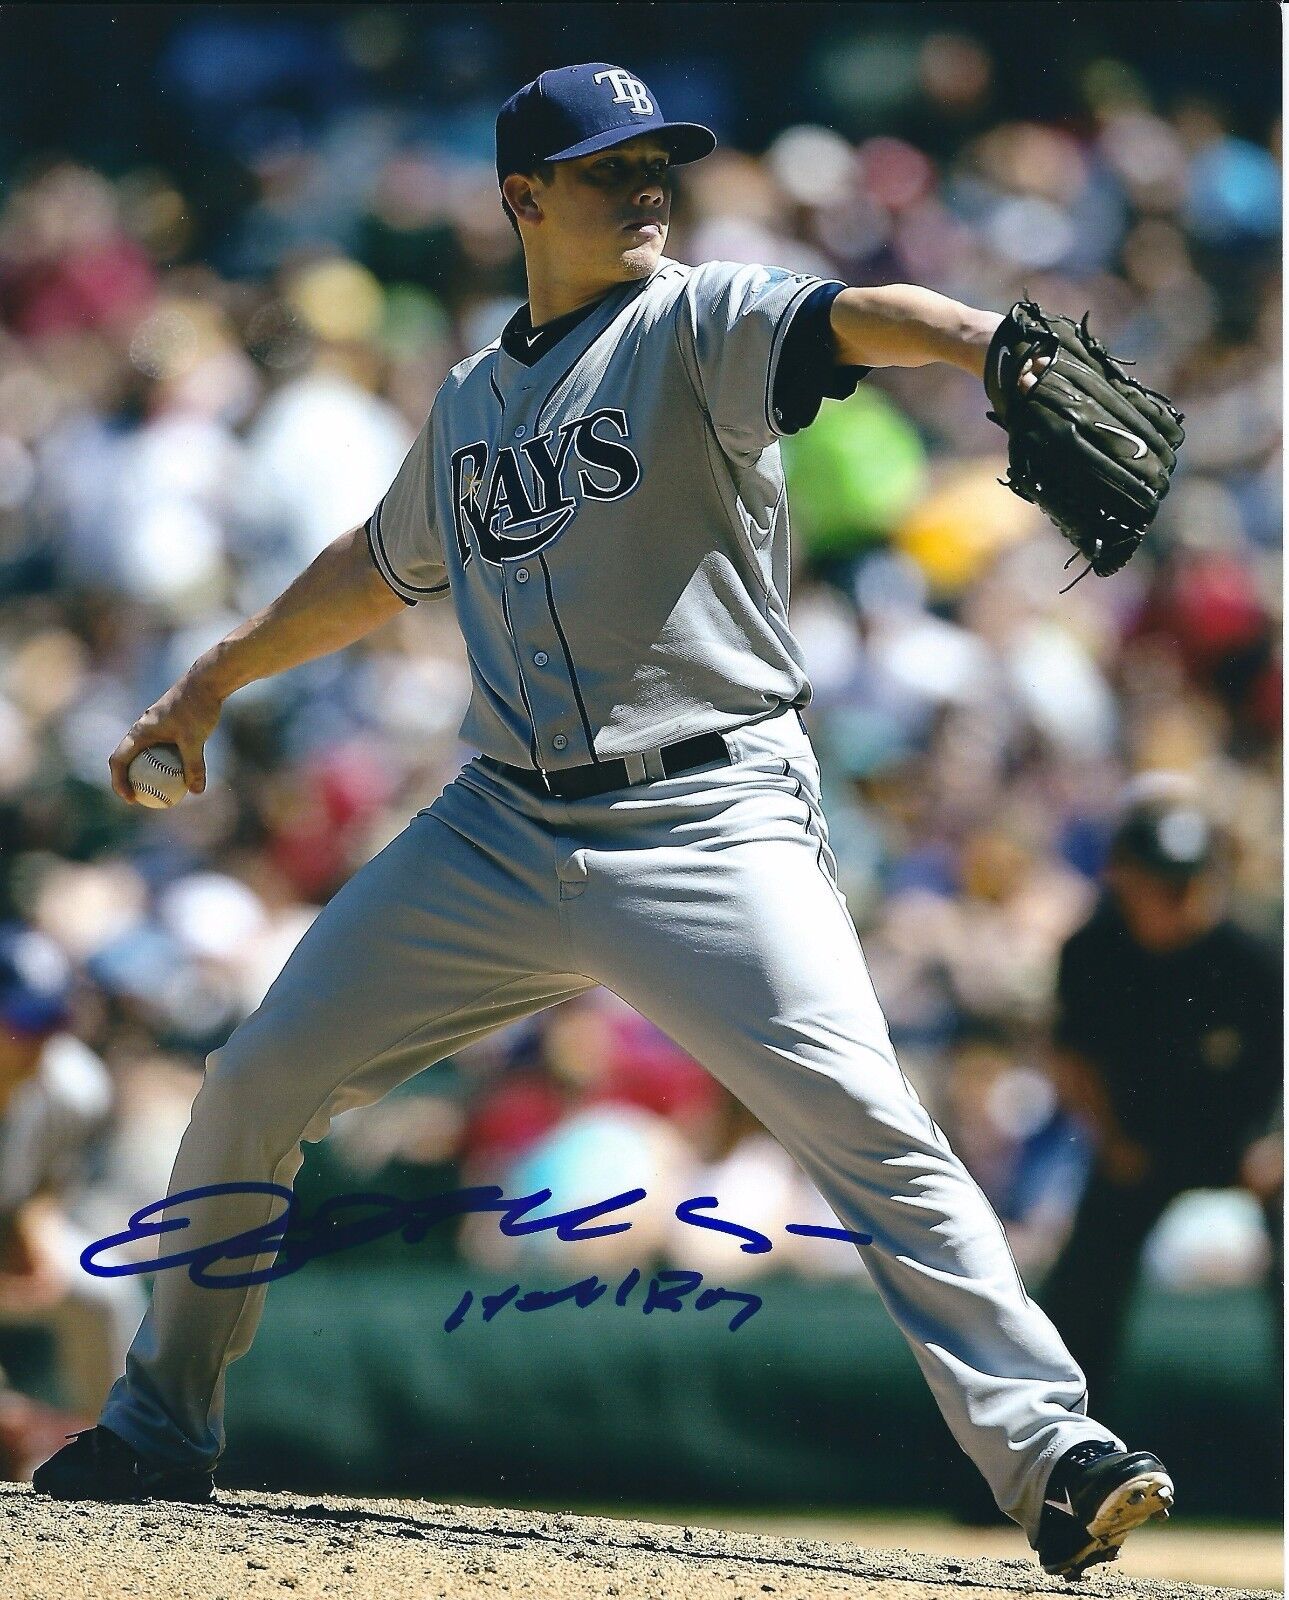 Signed 8x10 JEREMY HELLICKSON ROY 11 Tampa Bay Rays Autographed Photo Poster painting - COA